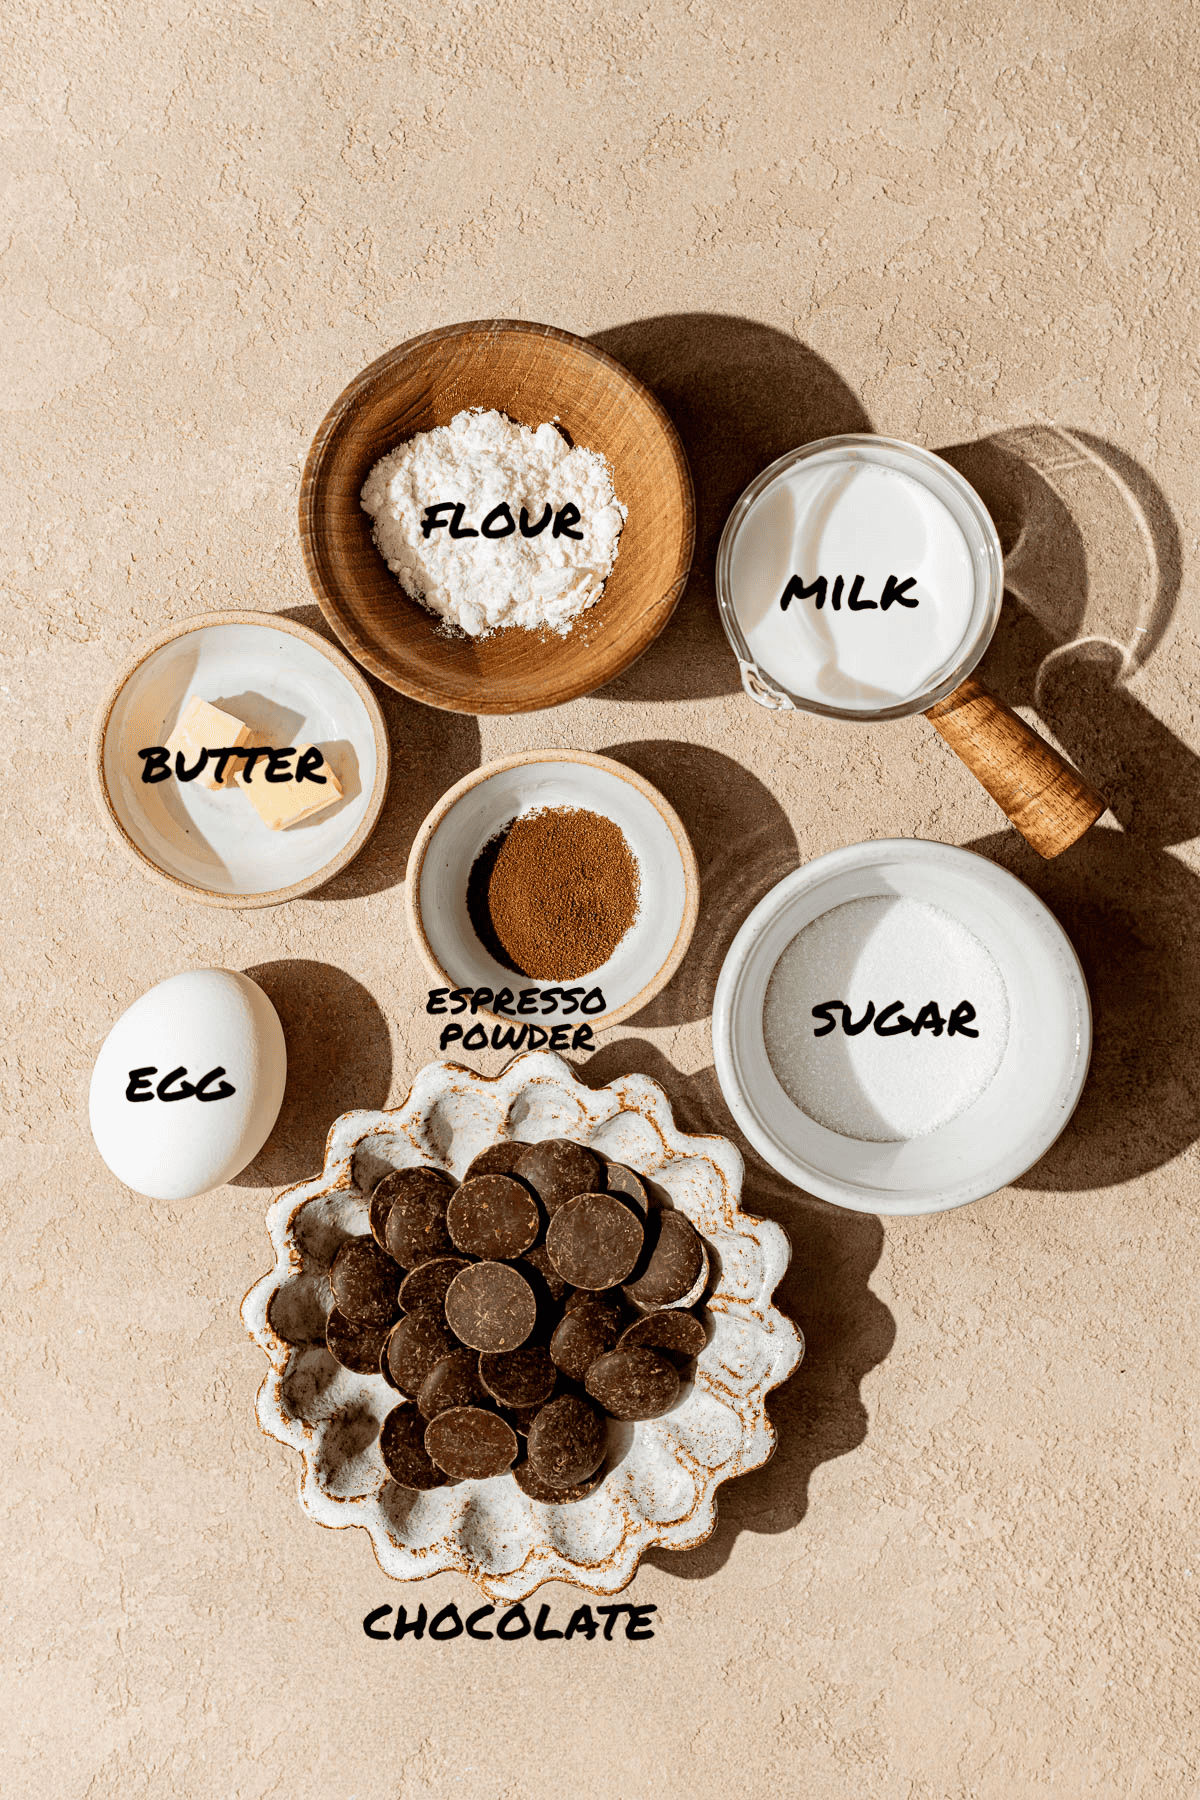 chocolate souffle ingredients.